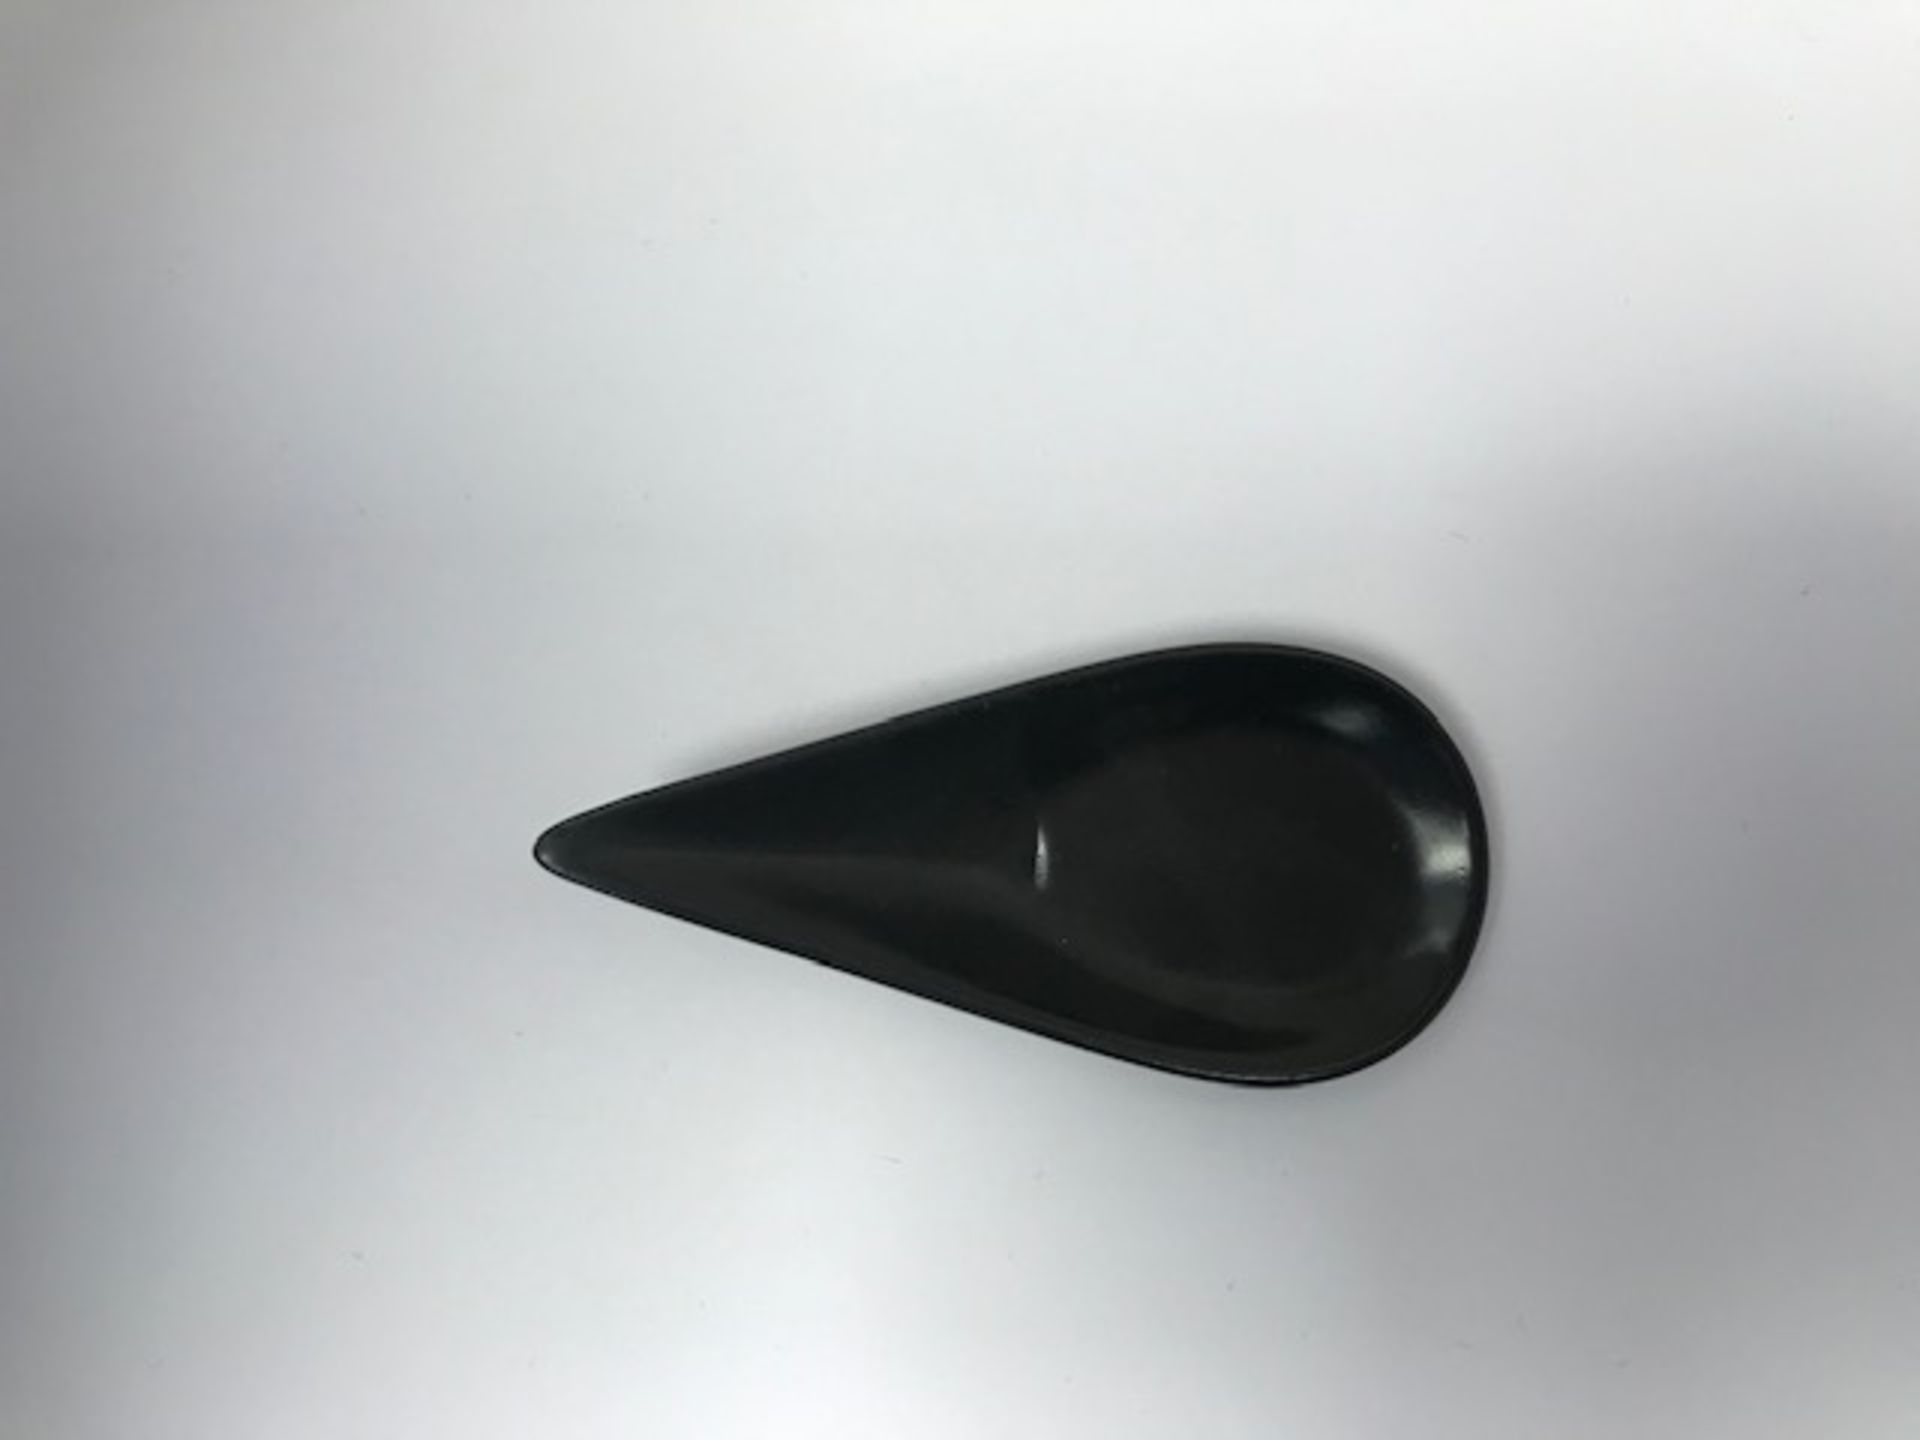 Teardrop black canape spoons x 480 - Image 2 of 4